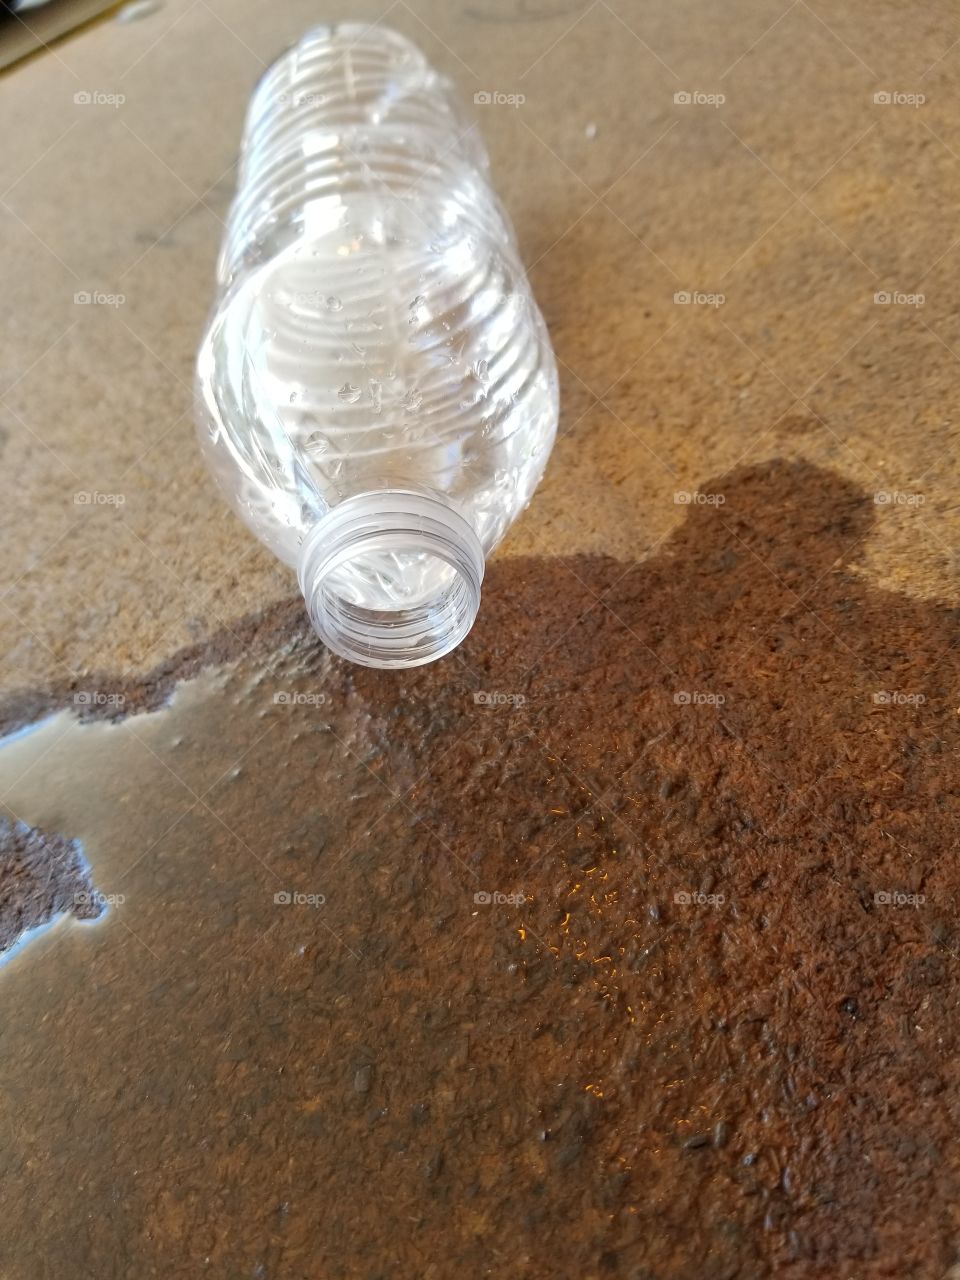 Bottle of water spilled over